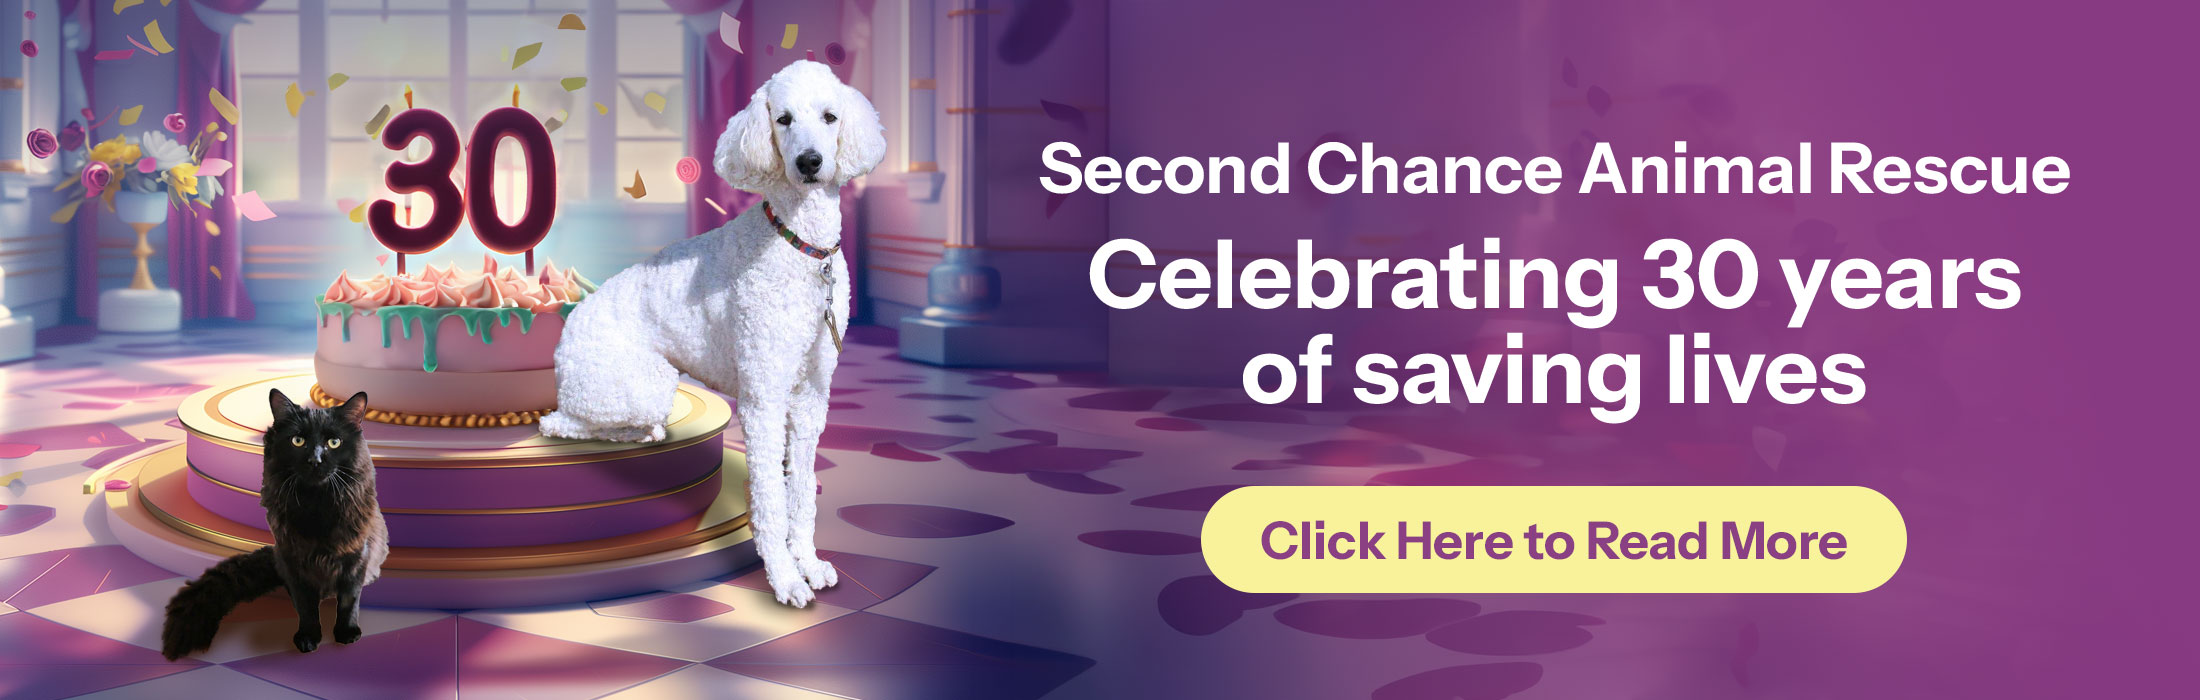 Second Chance Animal Rescue - 30th Anniversary